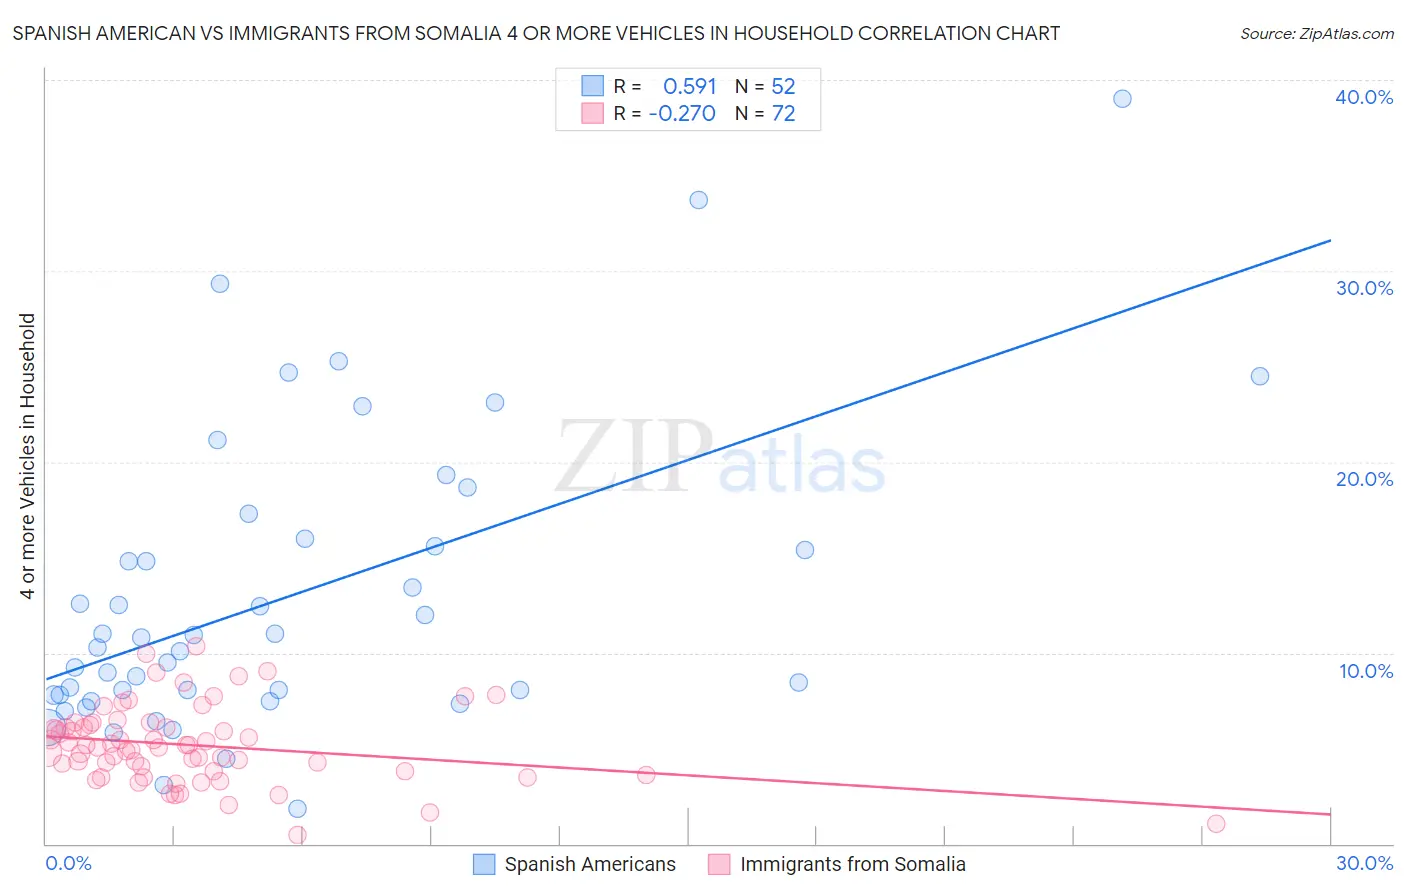 Spanish American vs Immigrants from Somalia 4 or more Vehicles in Household